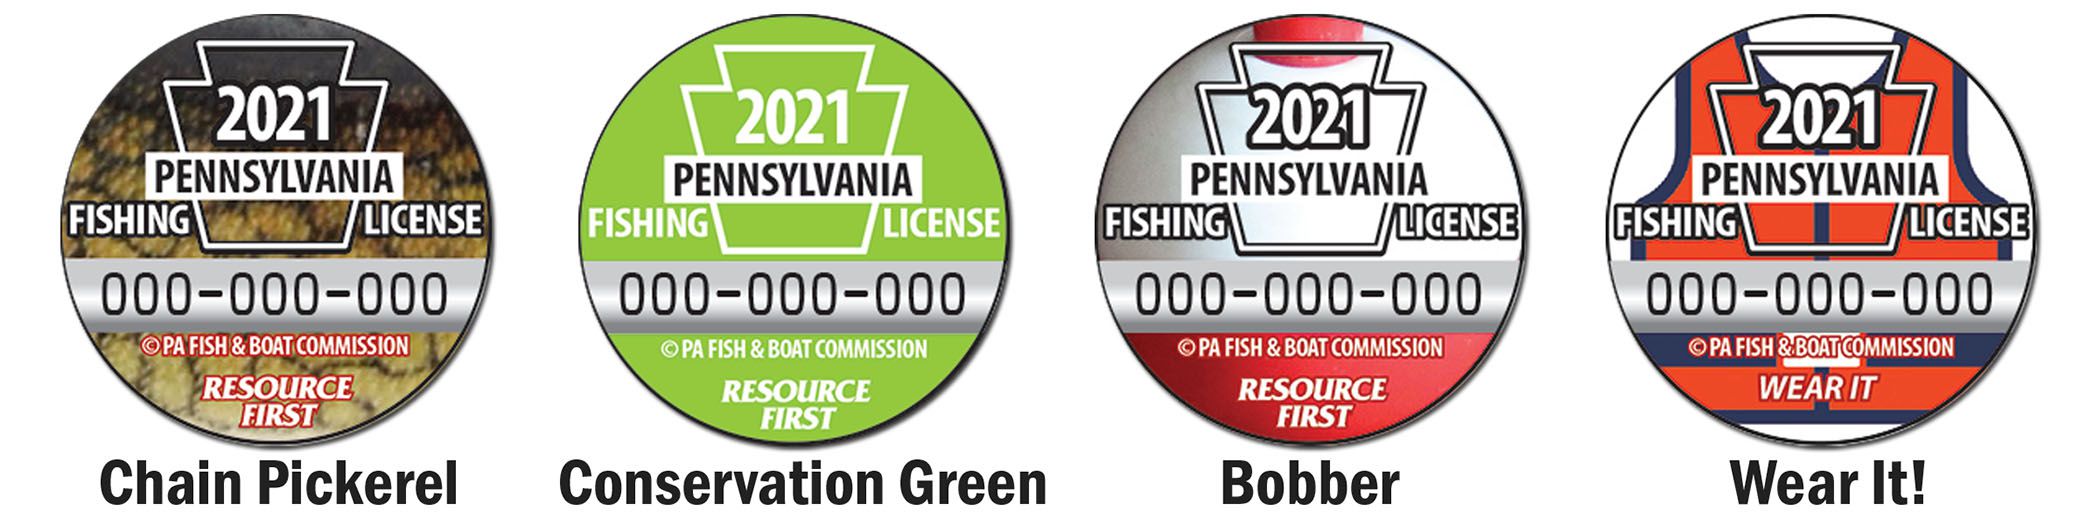 PA Fish and Boat Commission opens fishing button selection for